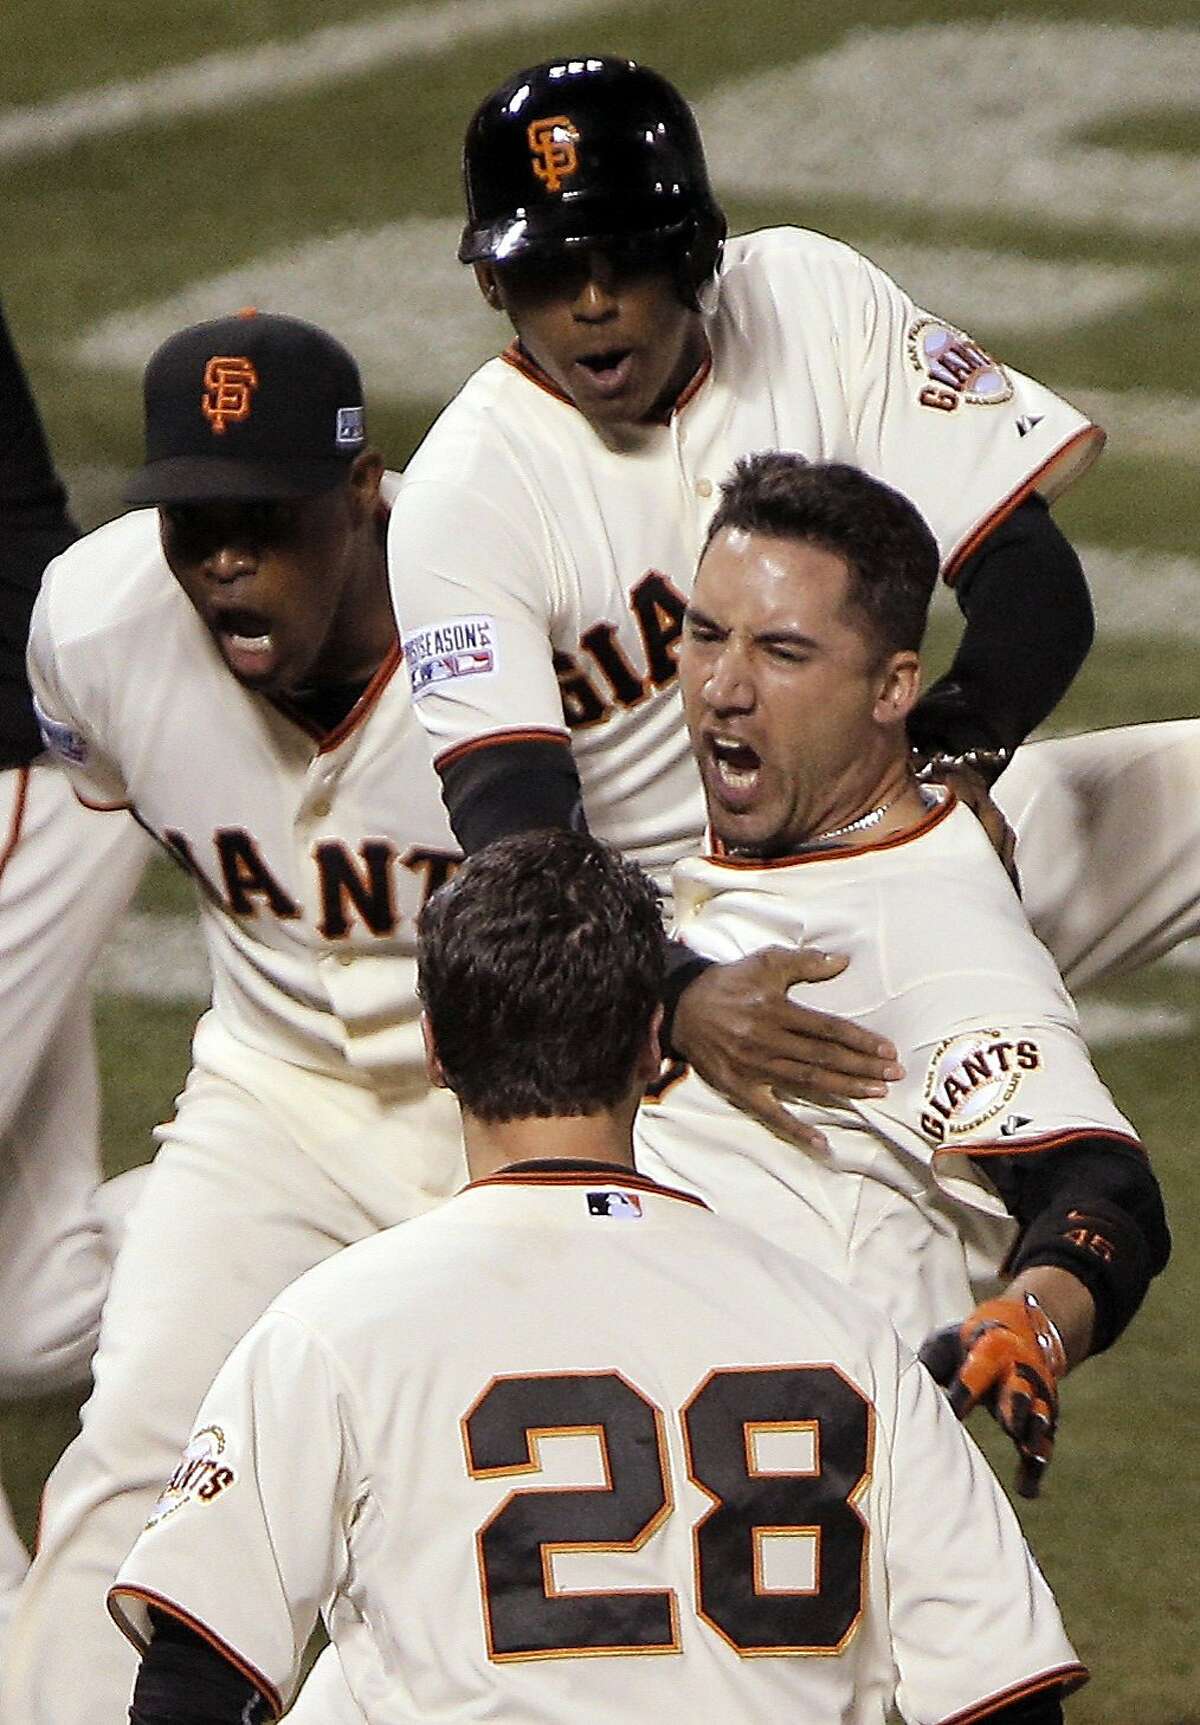 The Giants Travis Ishikawa, center, is met at home plate by Santiago Casilla, Joaquin Arias, and Buster Posey as Ishikawa heads toward home plate on his three-run walk off home run during Game 5 of the NLCS at AT&T Park on Thursday, Oct. 16, 2014 in San Francisco, Calif.